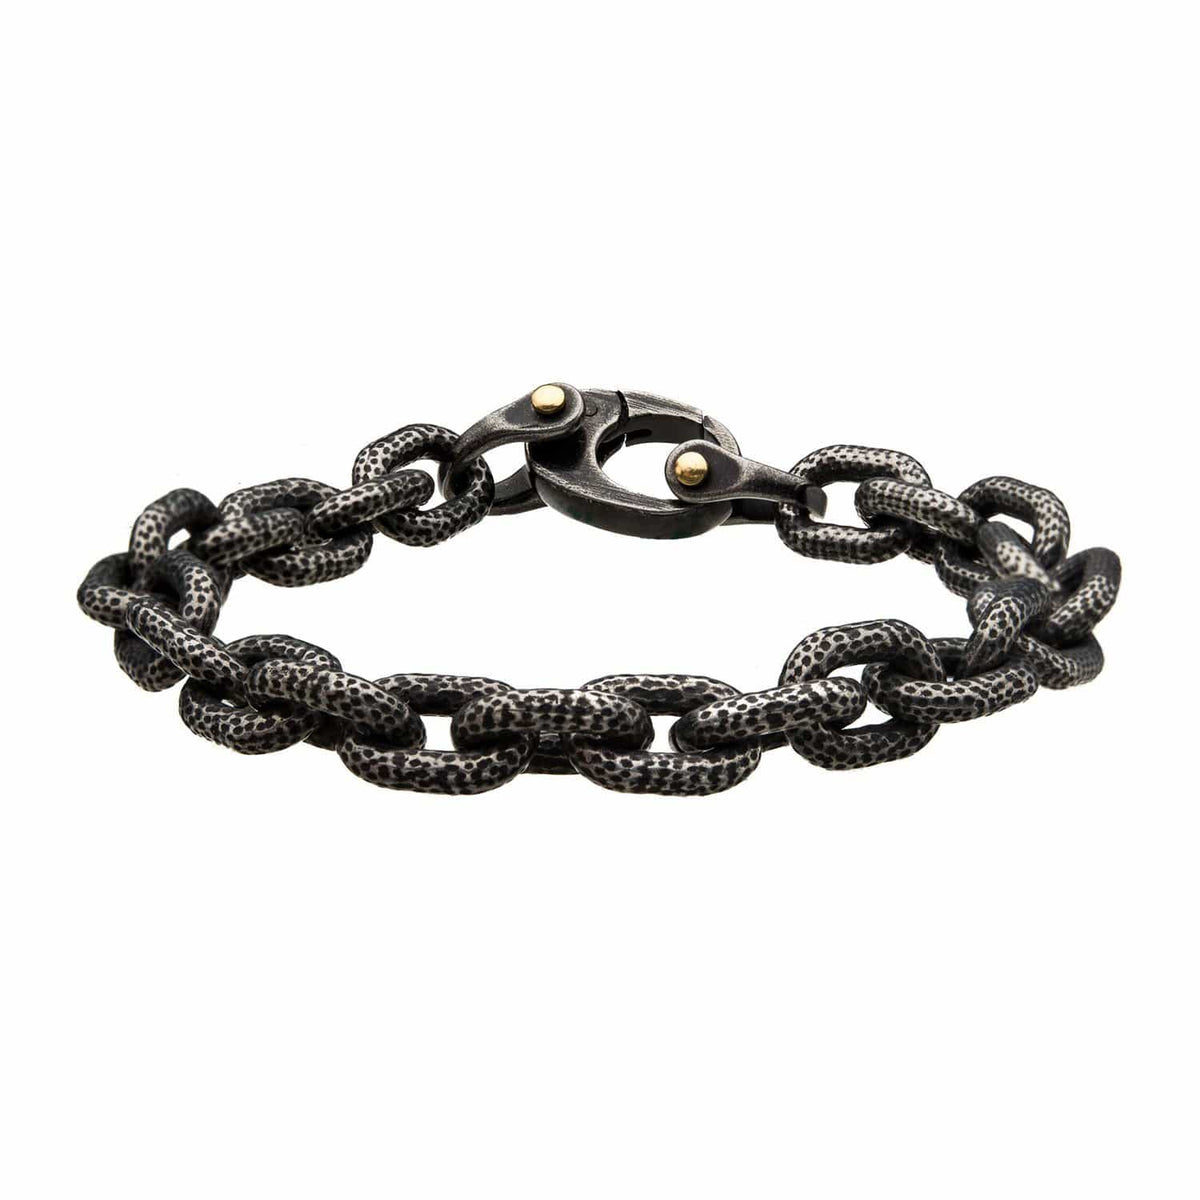 INOX JEWELRY Bracelets Antiqued Silver Tone Stainless Steel Oxidized Finish Gunmetal Large Curb Chain Bracelet BR2212